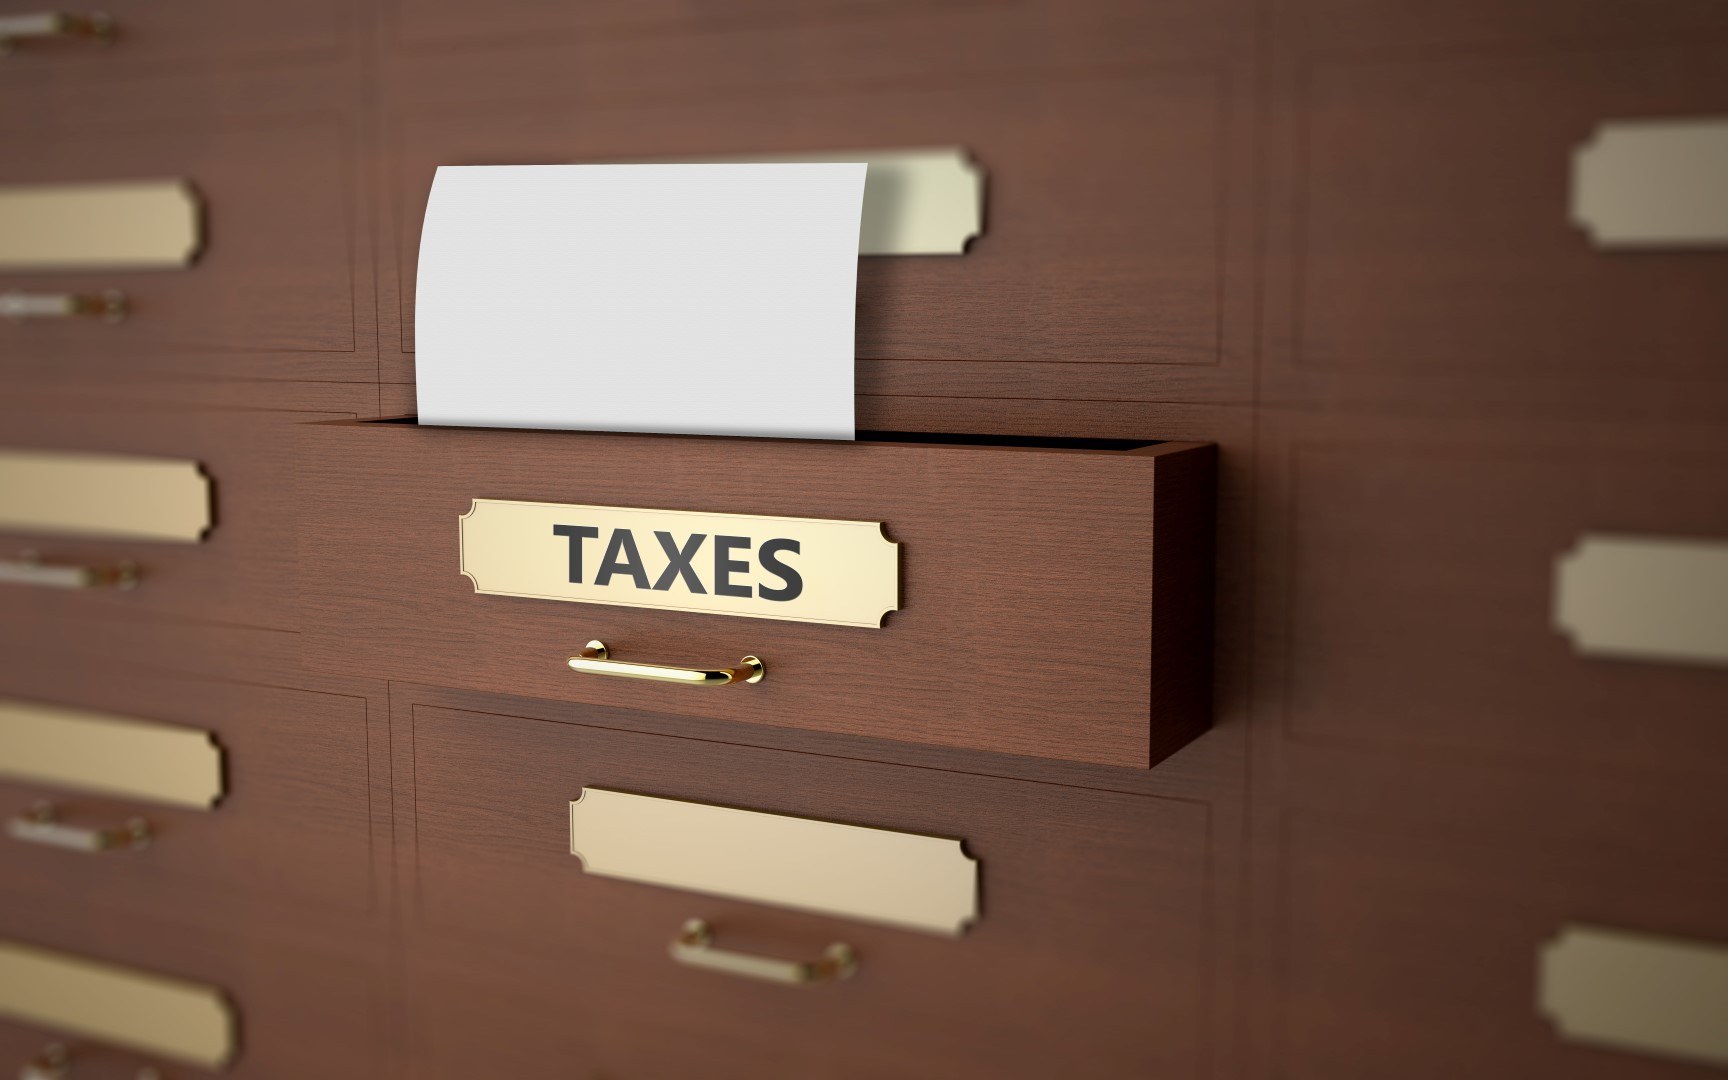 Office drawers with text on the subject of taxes